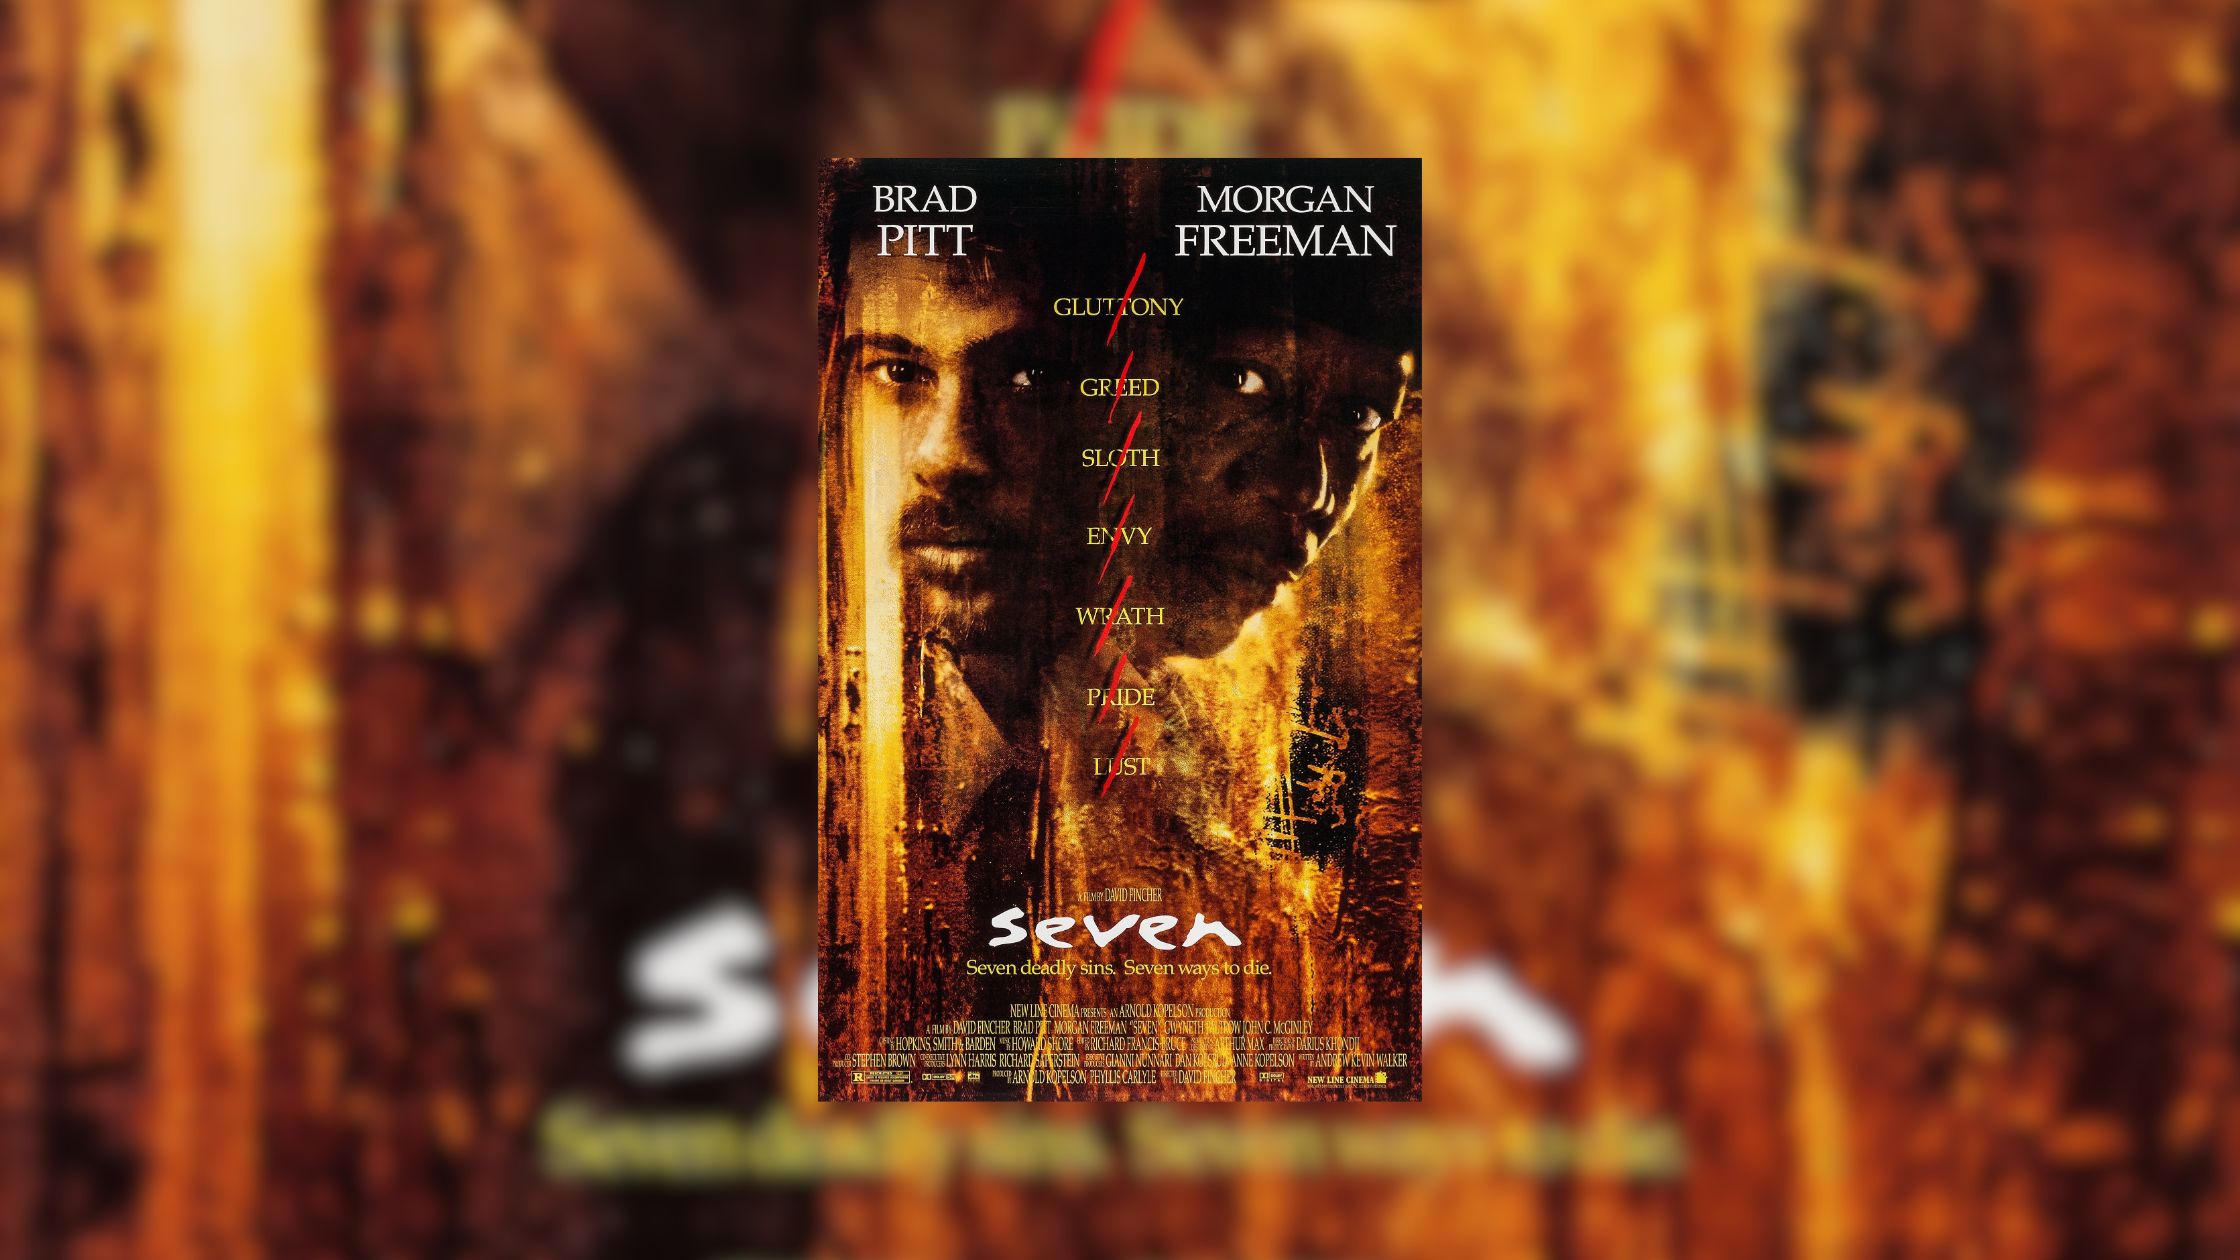 Poster Image of the film Seven released in 1995.